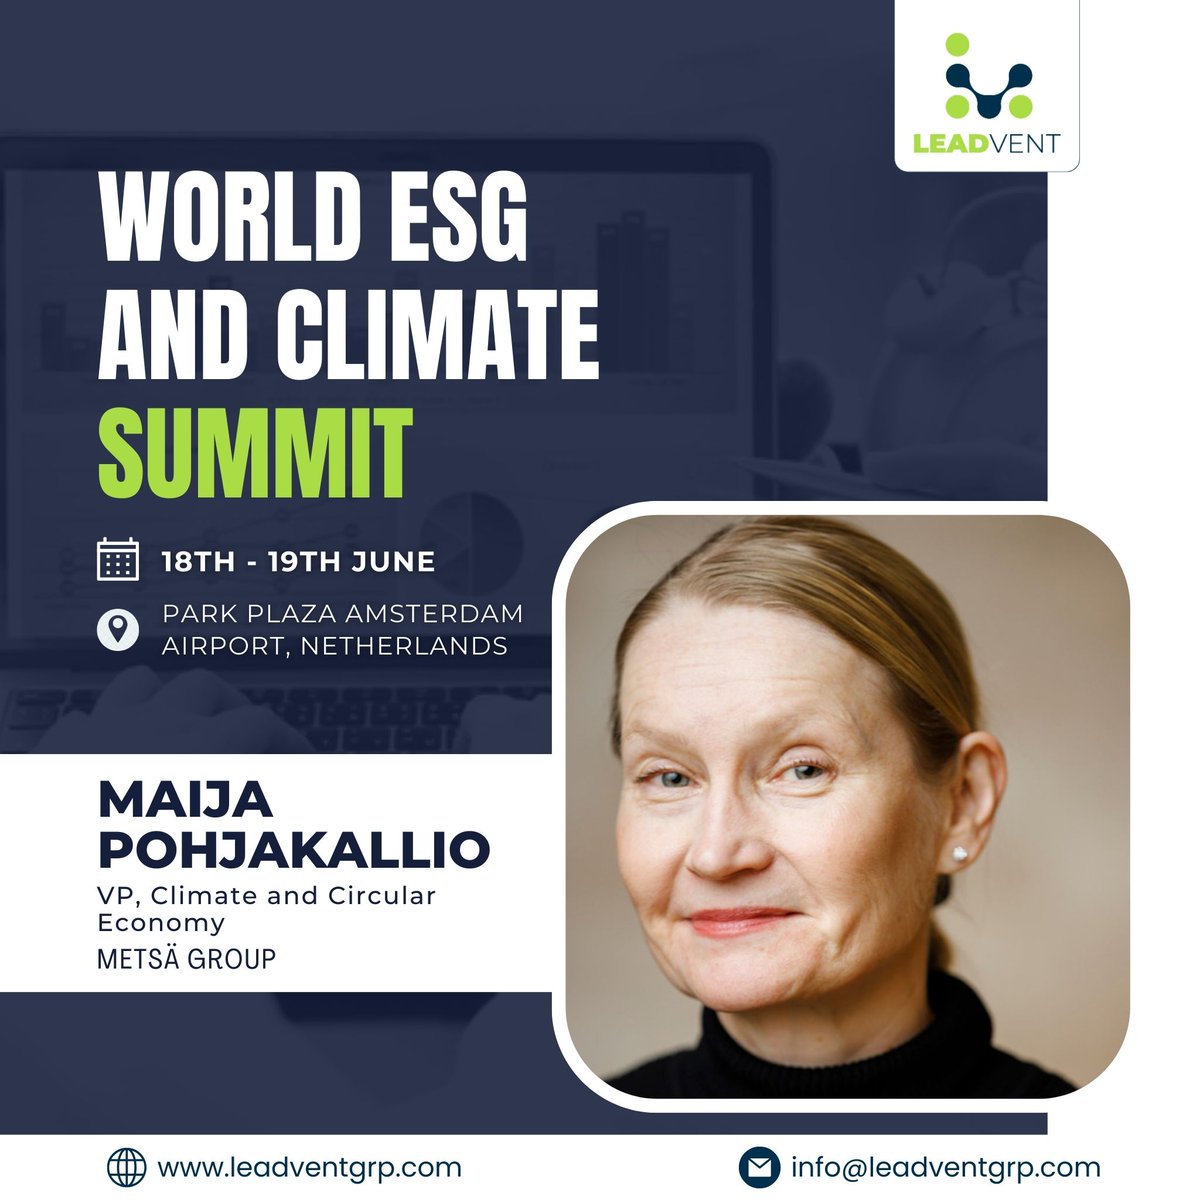 Excited to introduce Maija Pohjakallio. She is the VP of Climate and Circular Economy at Metsä Group.

Obtain a pass - bit.ly/3QaaYU7

#sustainability #ESGconcerns #netzero #Renewableenergy #Greenfinance #Greenpolicies #Sustainablefuture #Innovation #Socialimpact